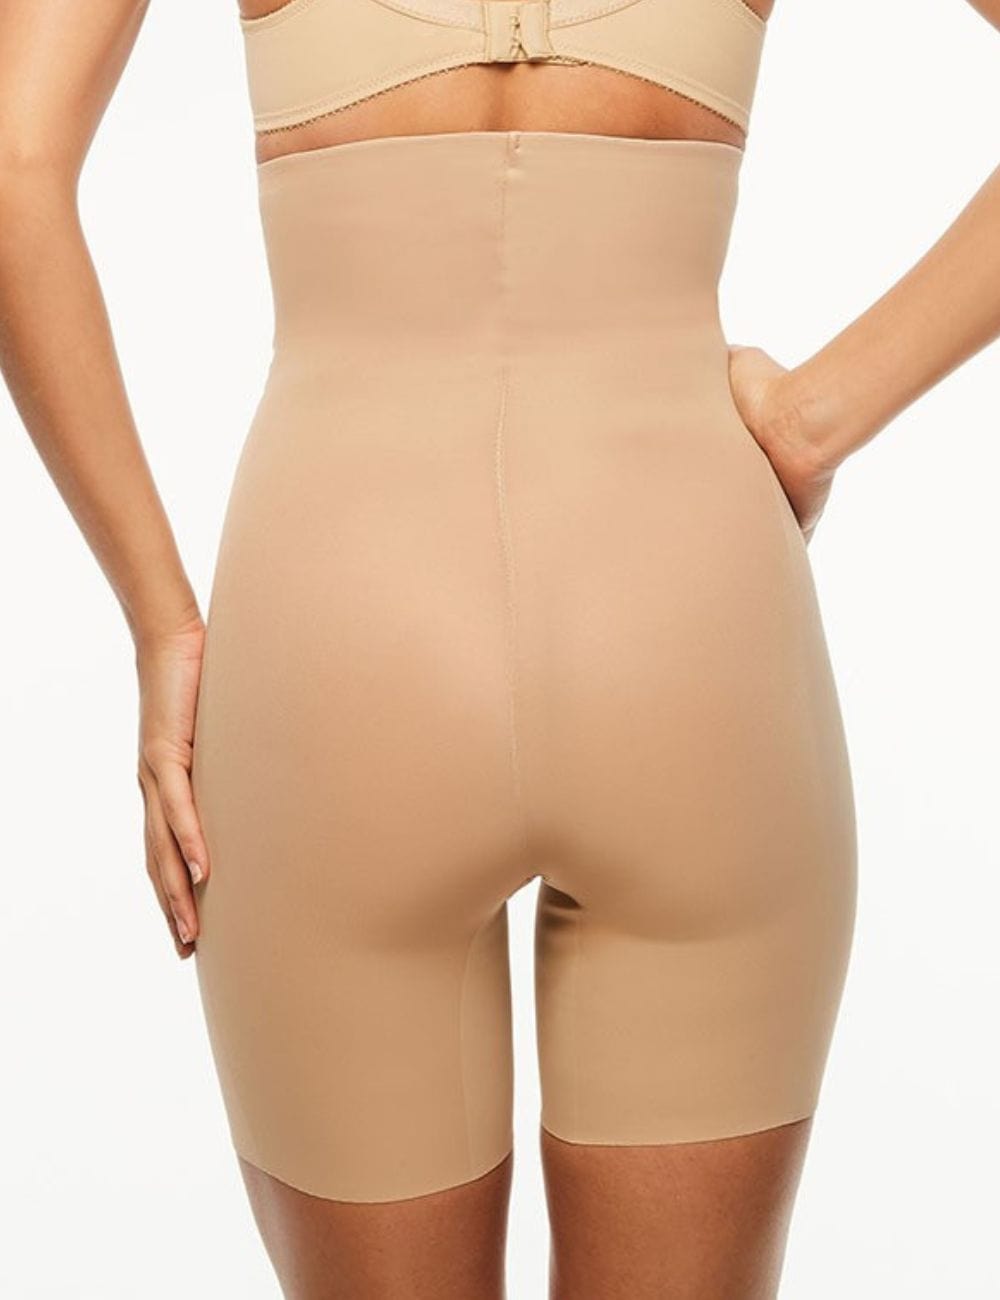 Envy New Body Shaper Top only(Nude) (M) at  Women's Clothing